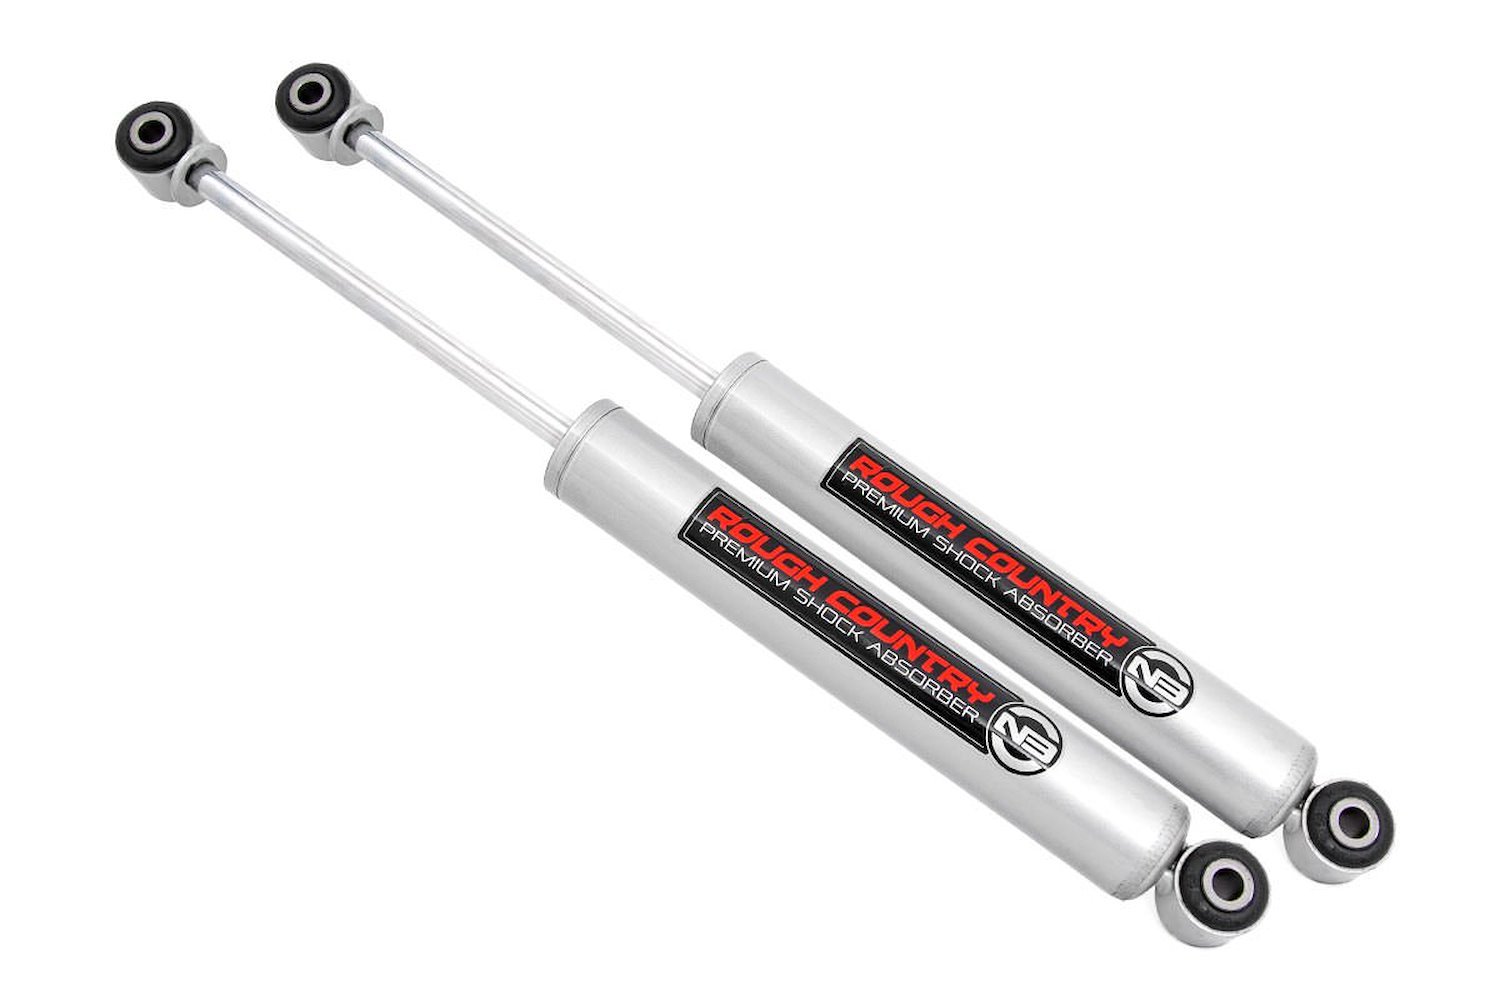 23250_B Chevy/GMC S10/S15 Pickup 4WD (82-04) N3 Front Shocks (Pair), 5.5-6"